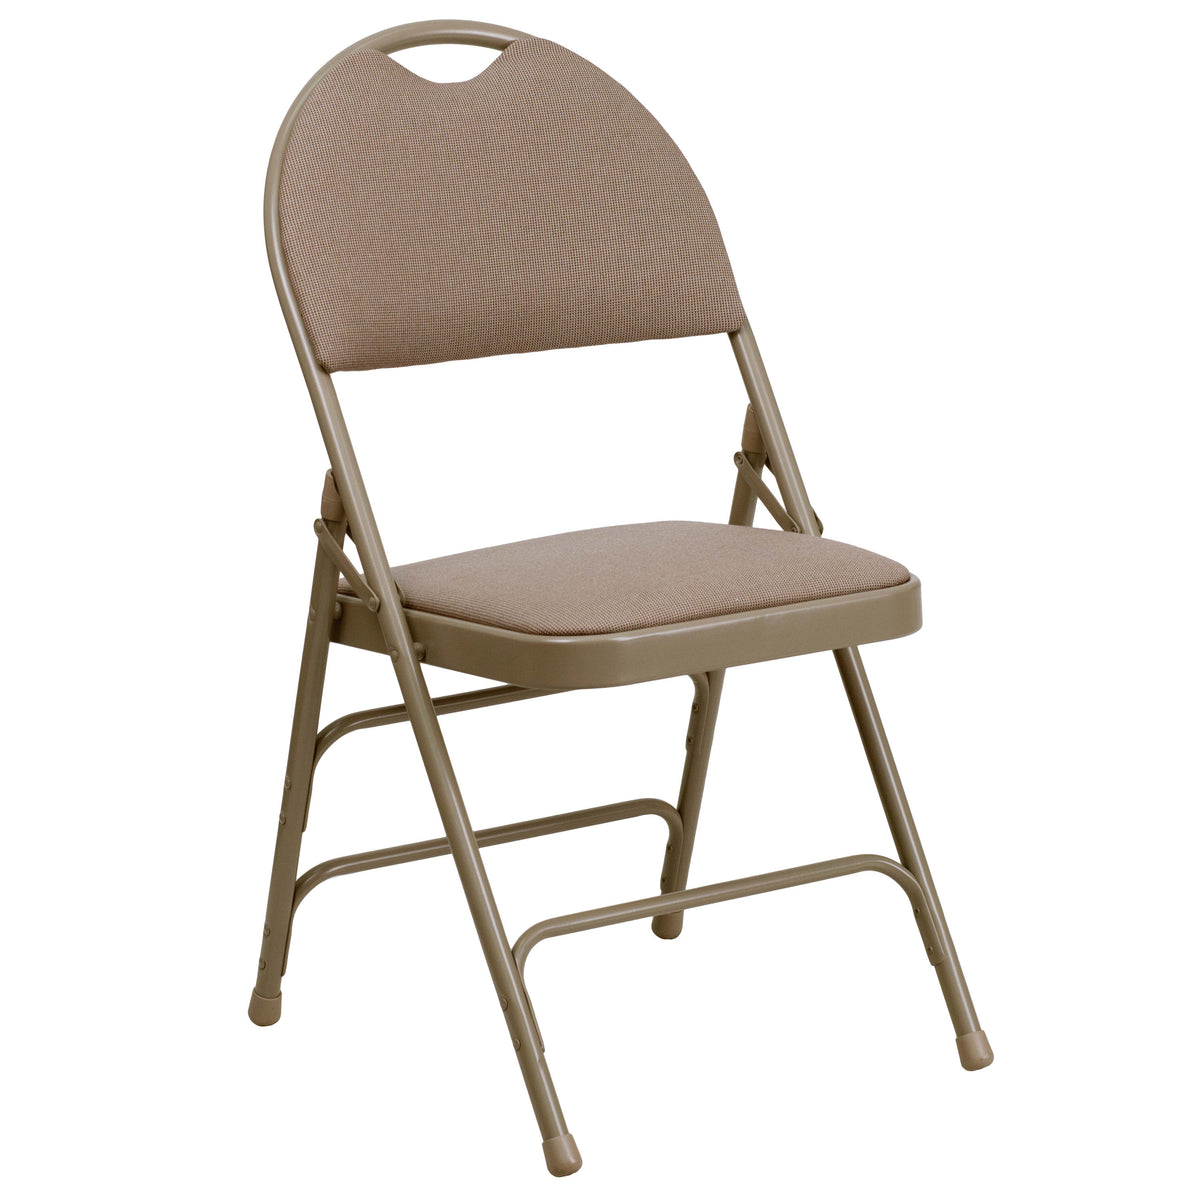 Beige Fabric/Beige Frame |#| Ultra-Premium Triple Braced Beige Fabric Folding Chair with Easy-Carry Handle